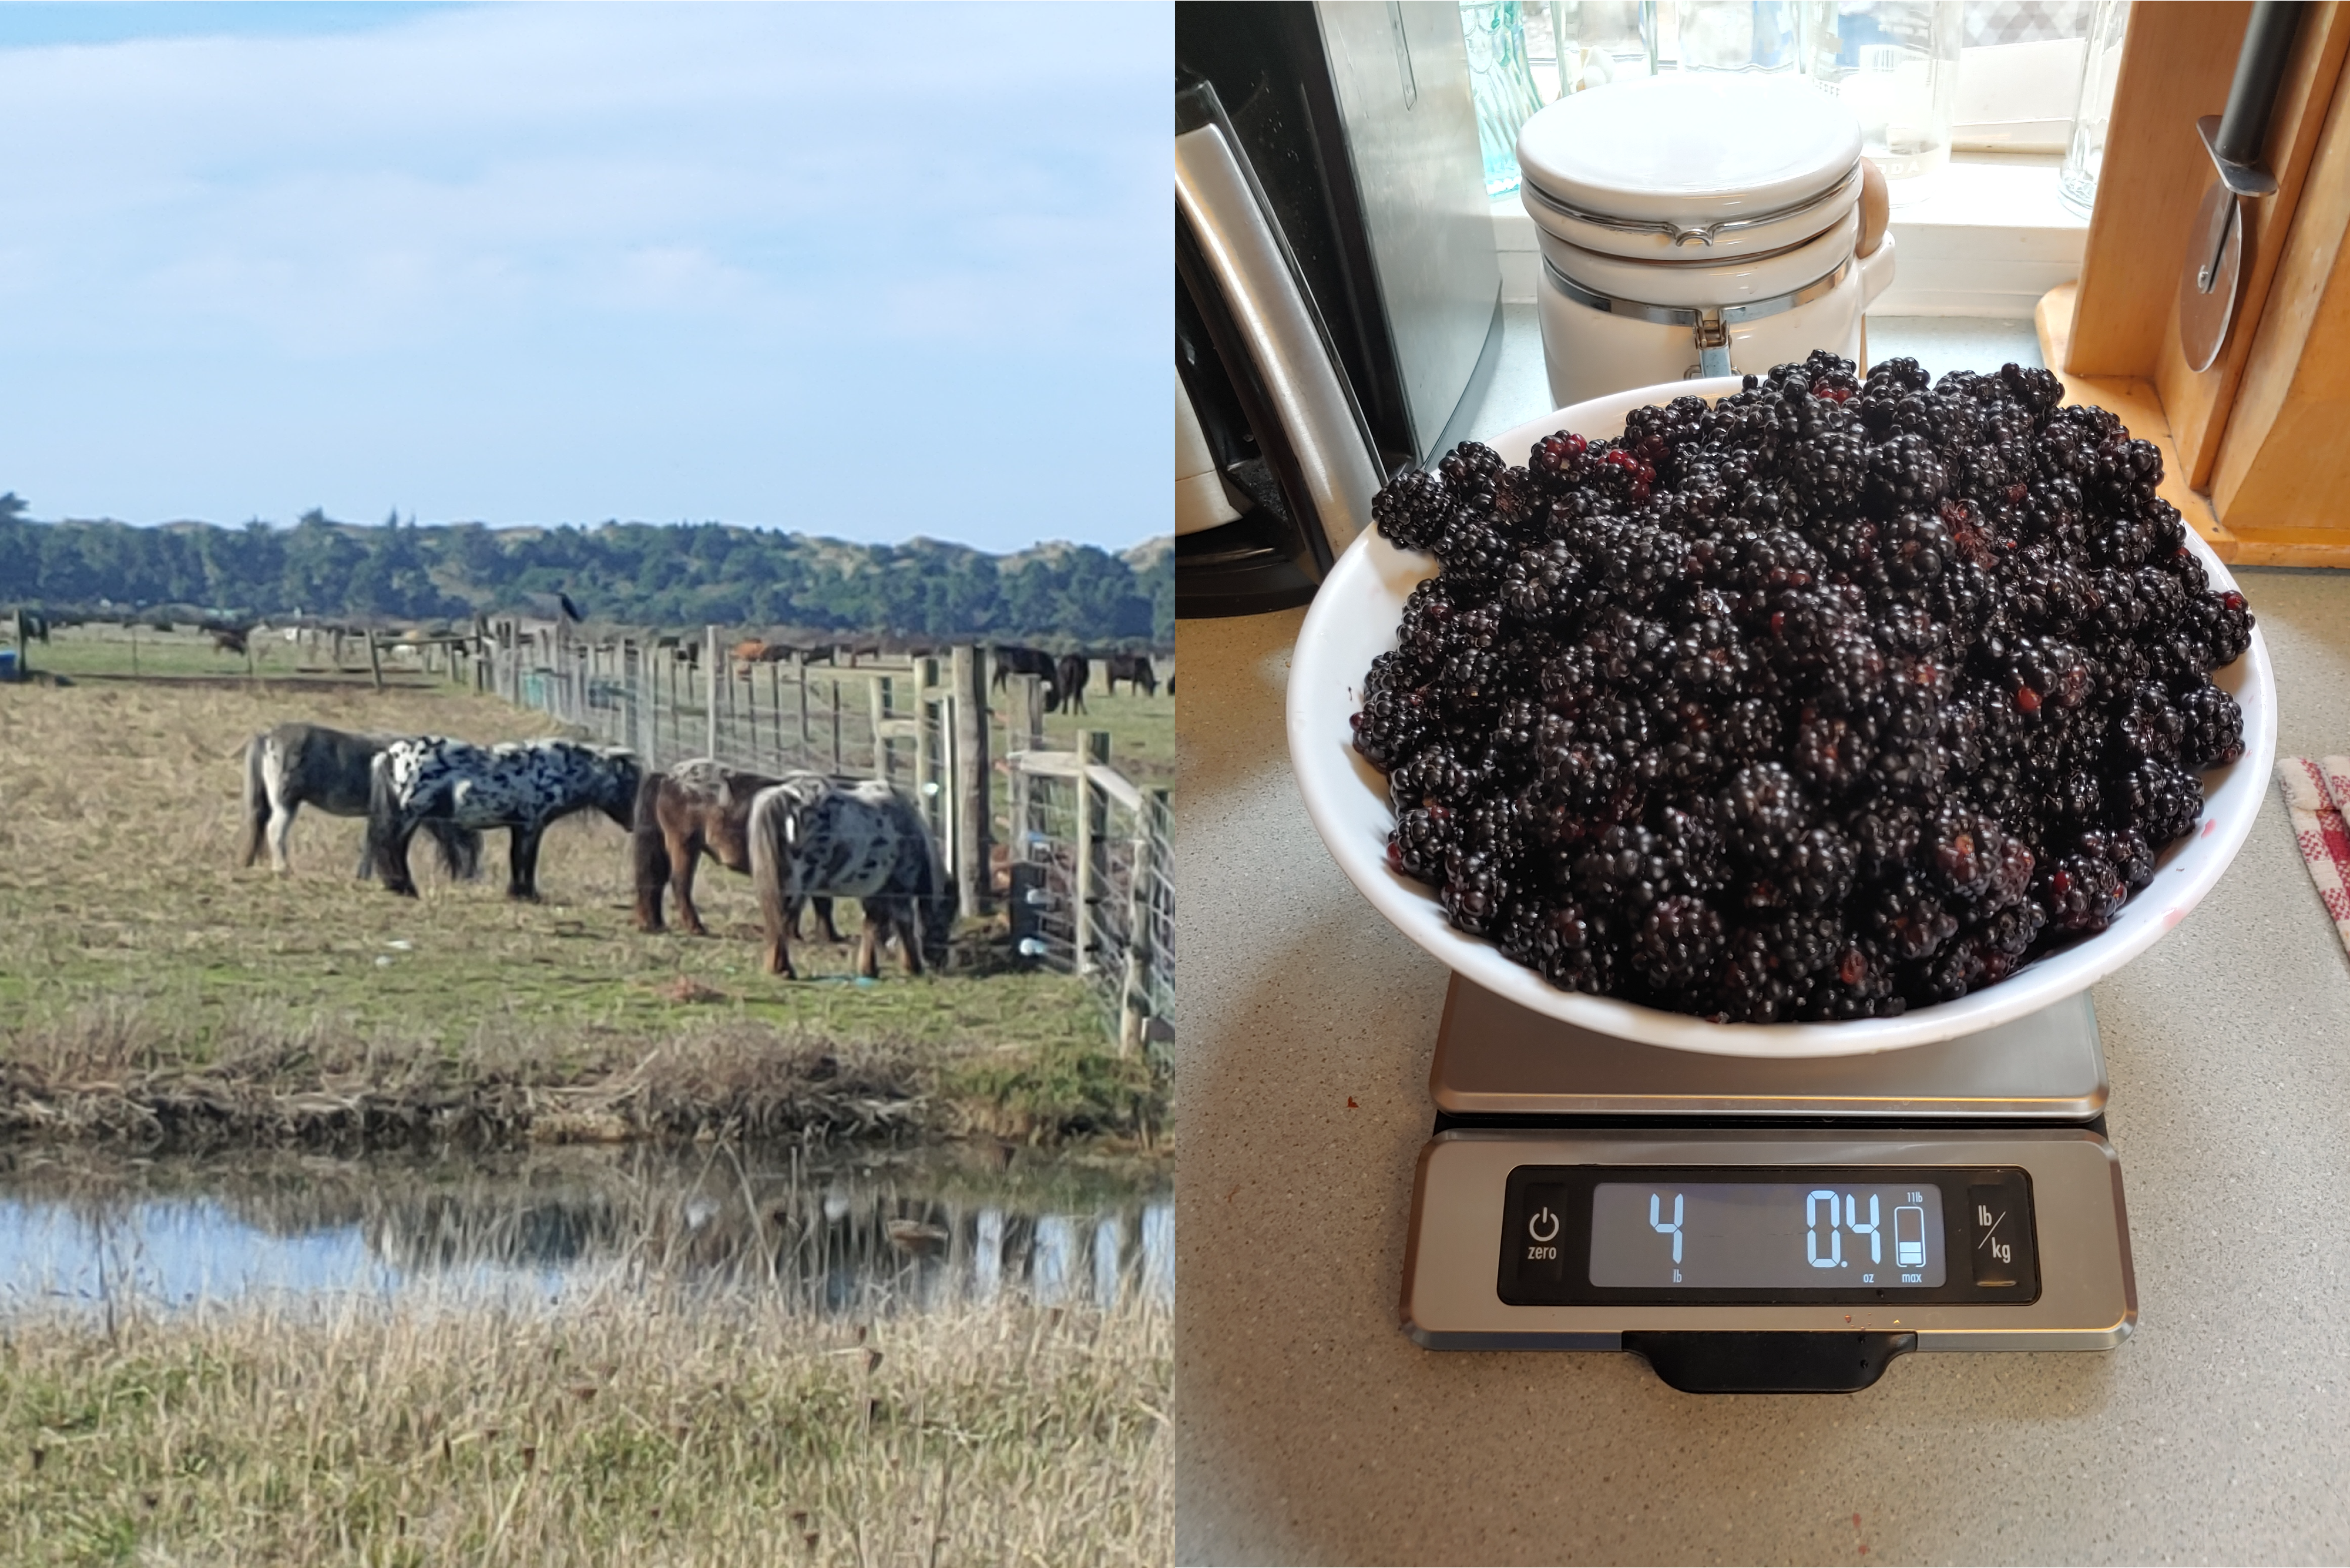 Left image of a herd of mini ponies grazing by a stream, and right image of a bowl of blackberries on a kitchen scale